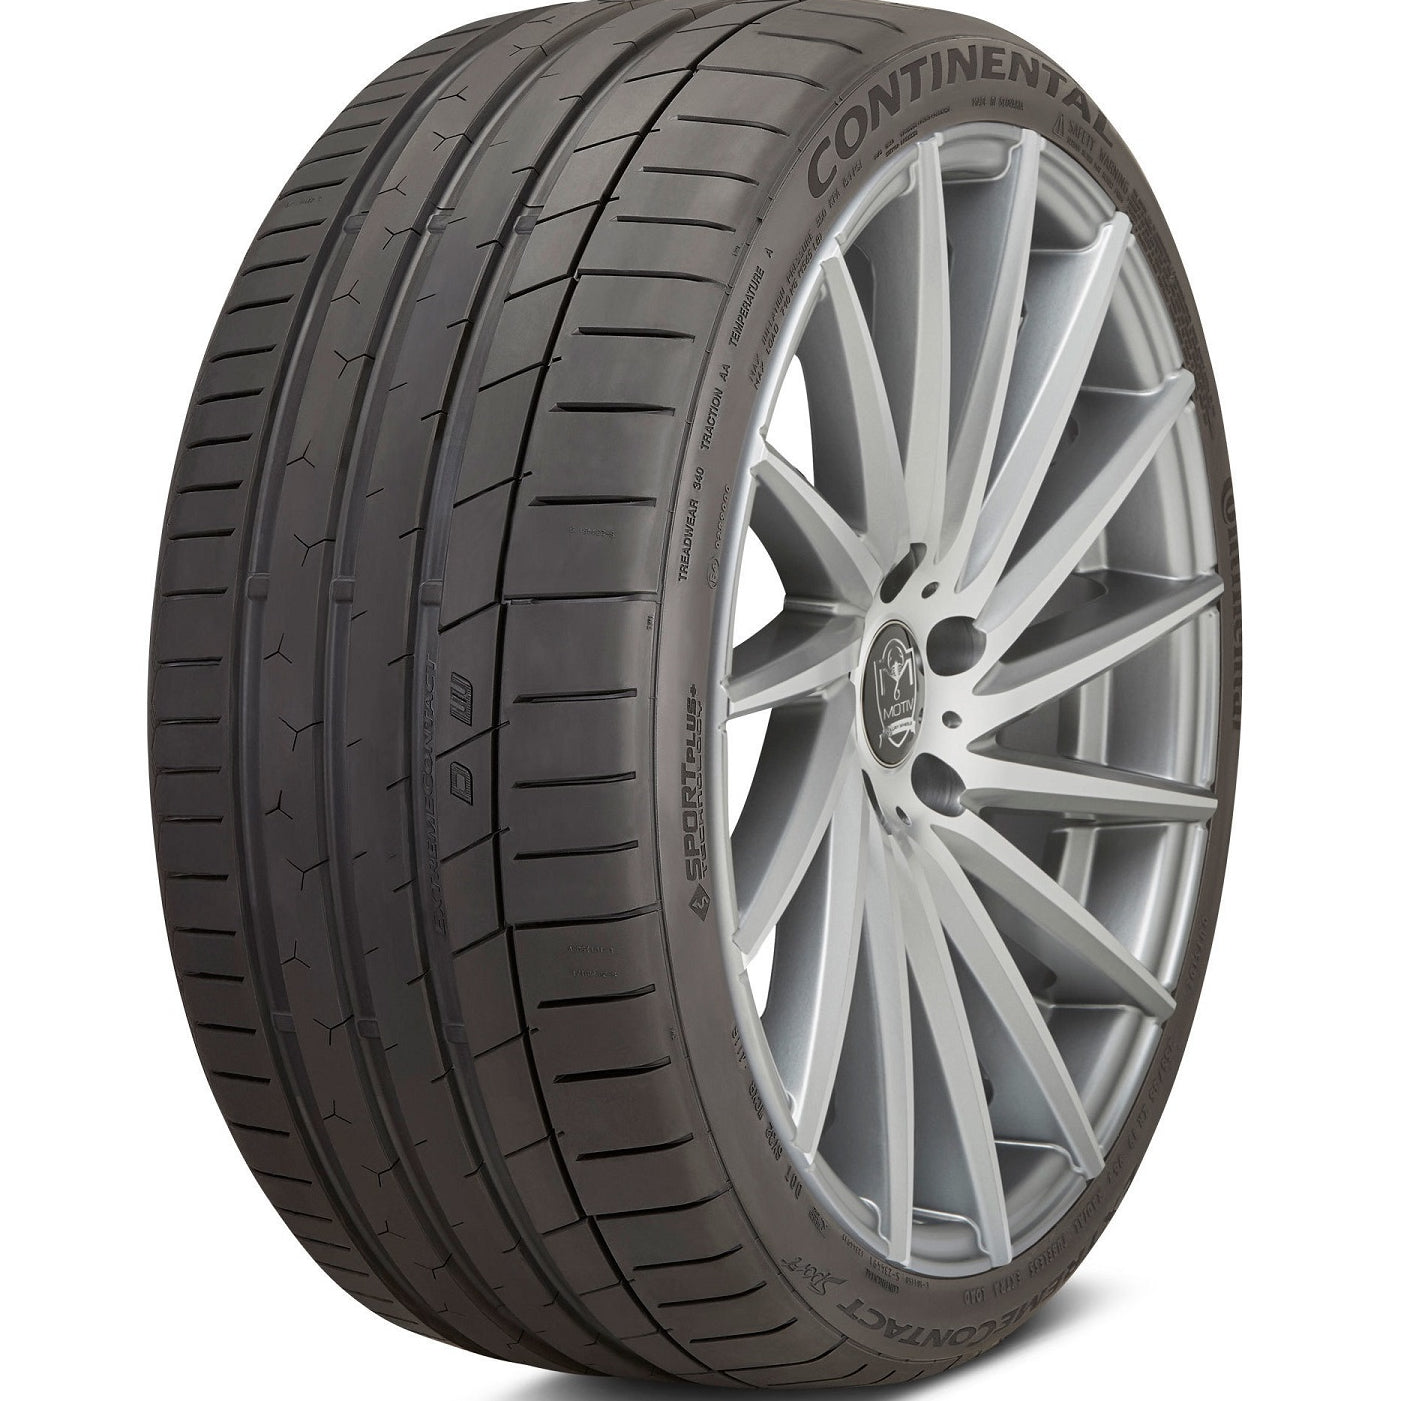 CONTINENTAL EXTREMECONTACT SPORT 215/45ZR17 (24.6X8.5R 17) Tires